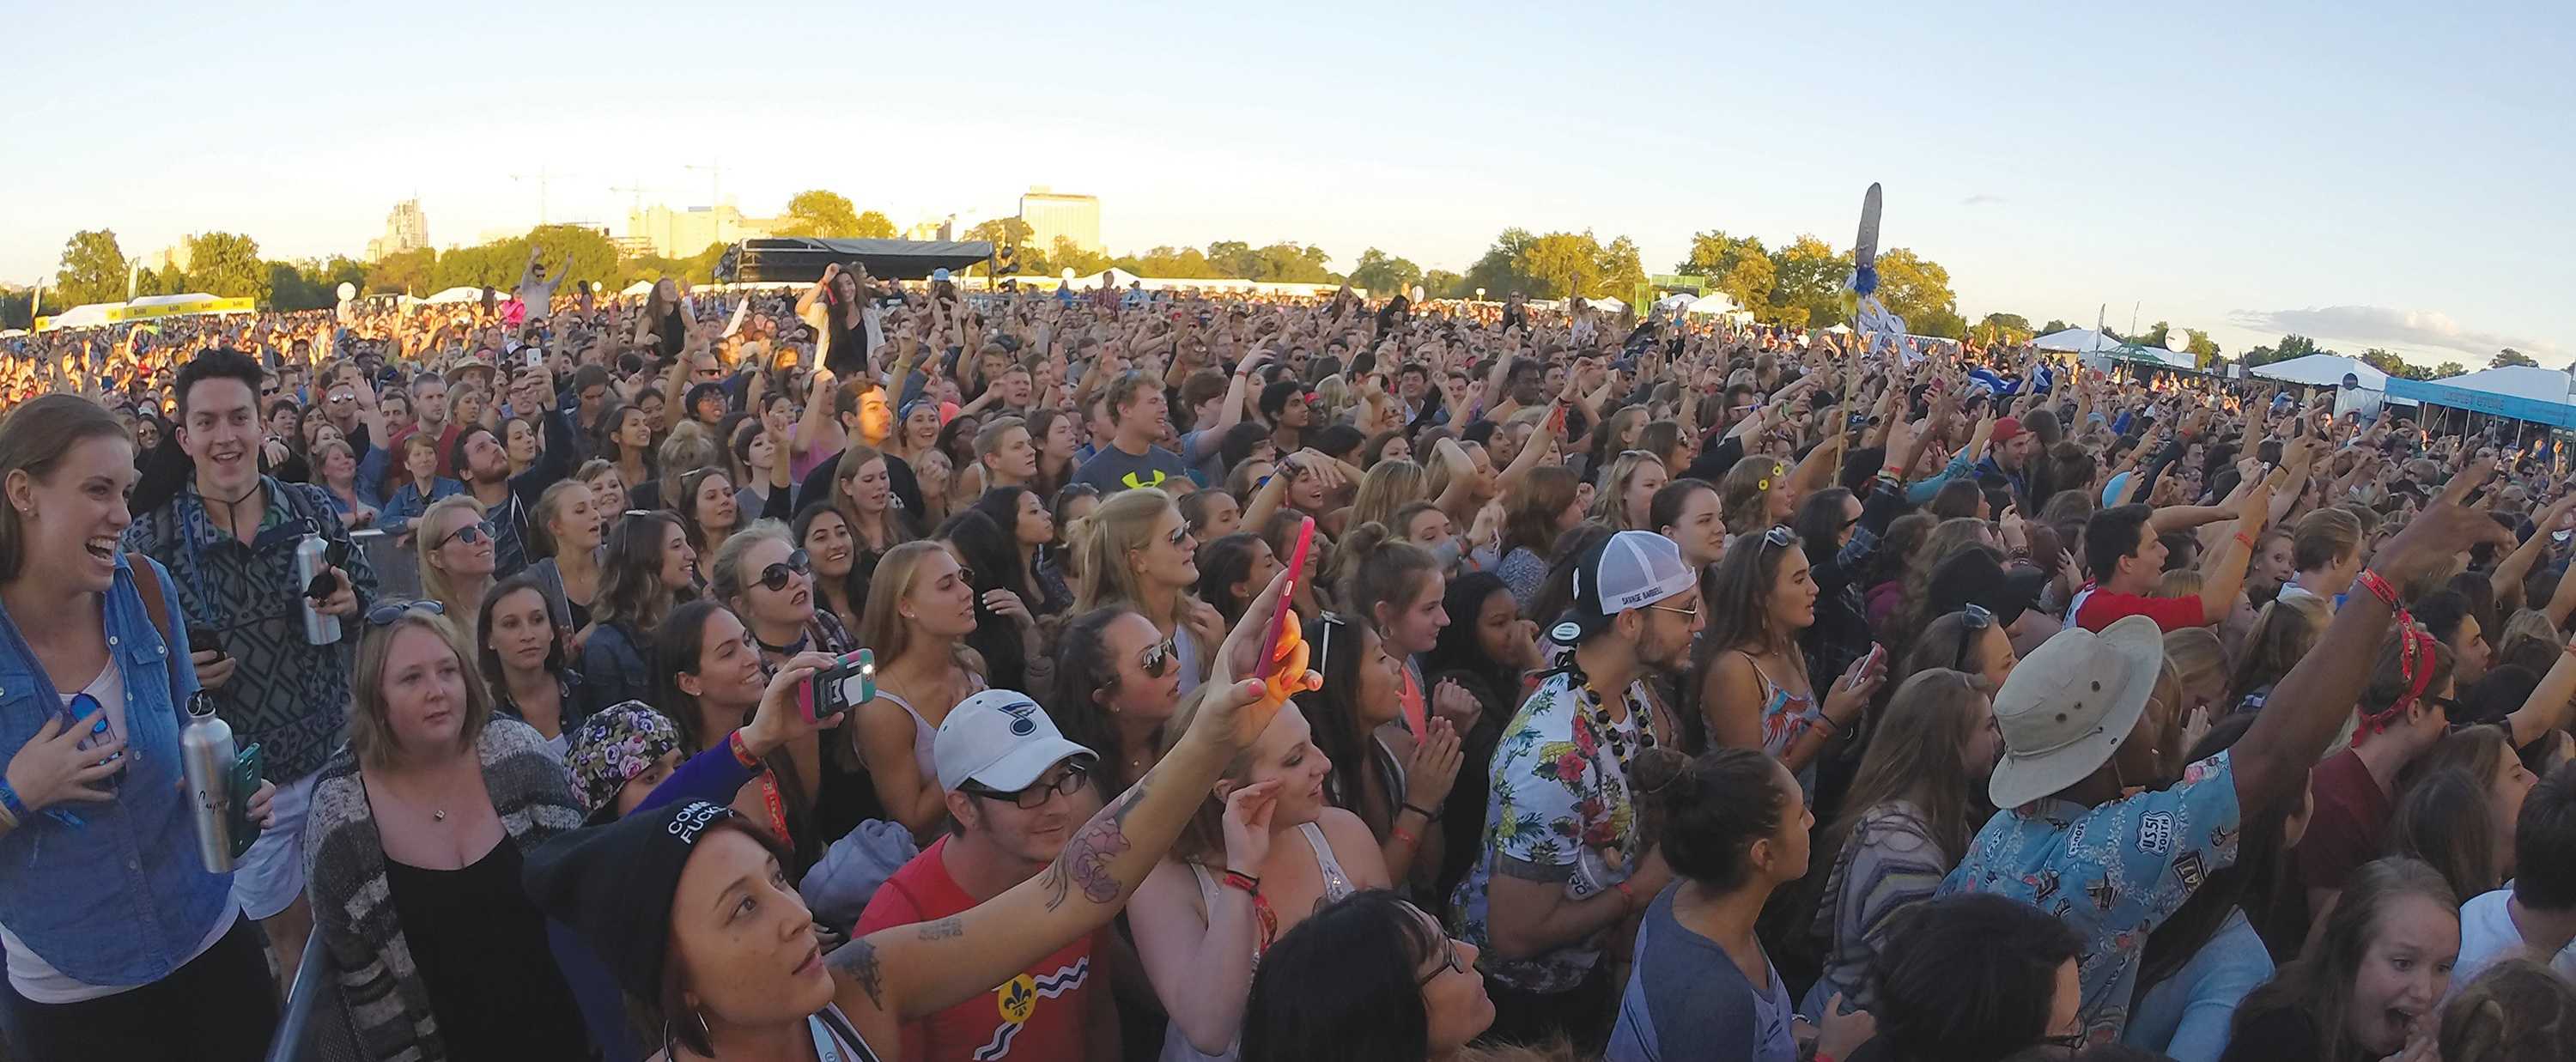 Photo by Phil Brahm The Crowd at the 2015 Loufest